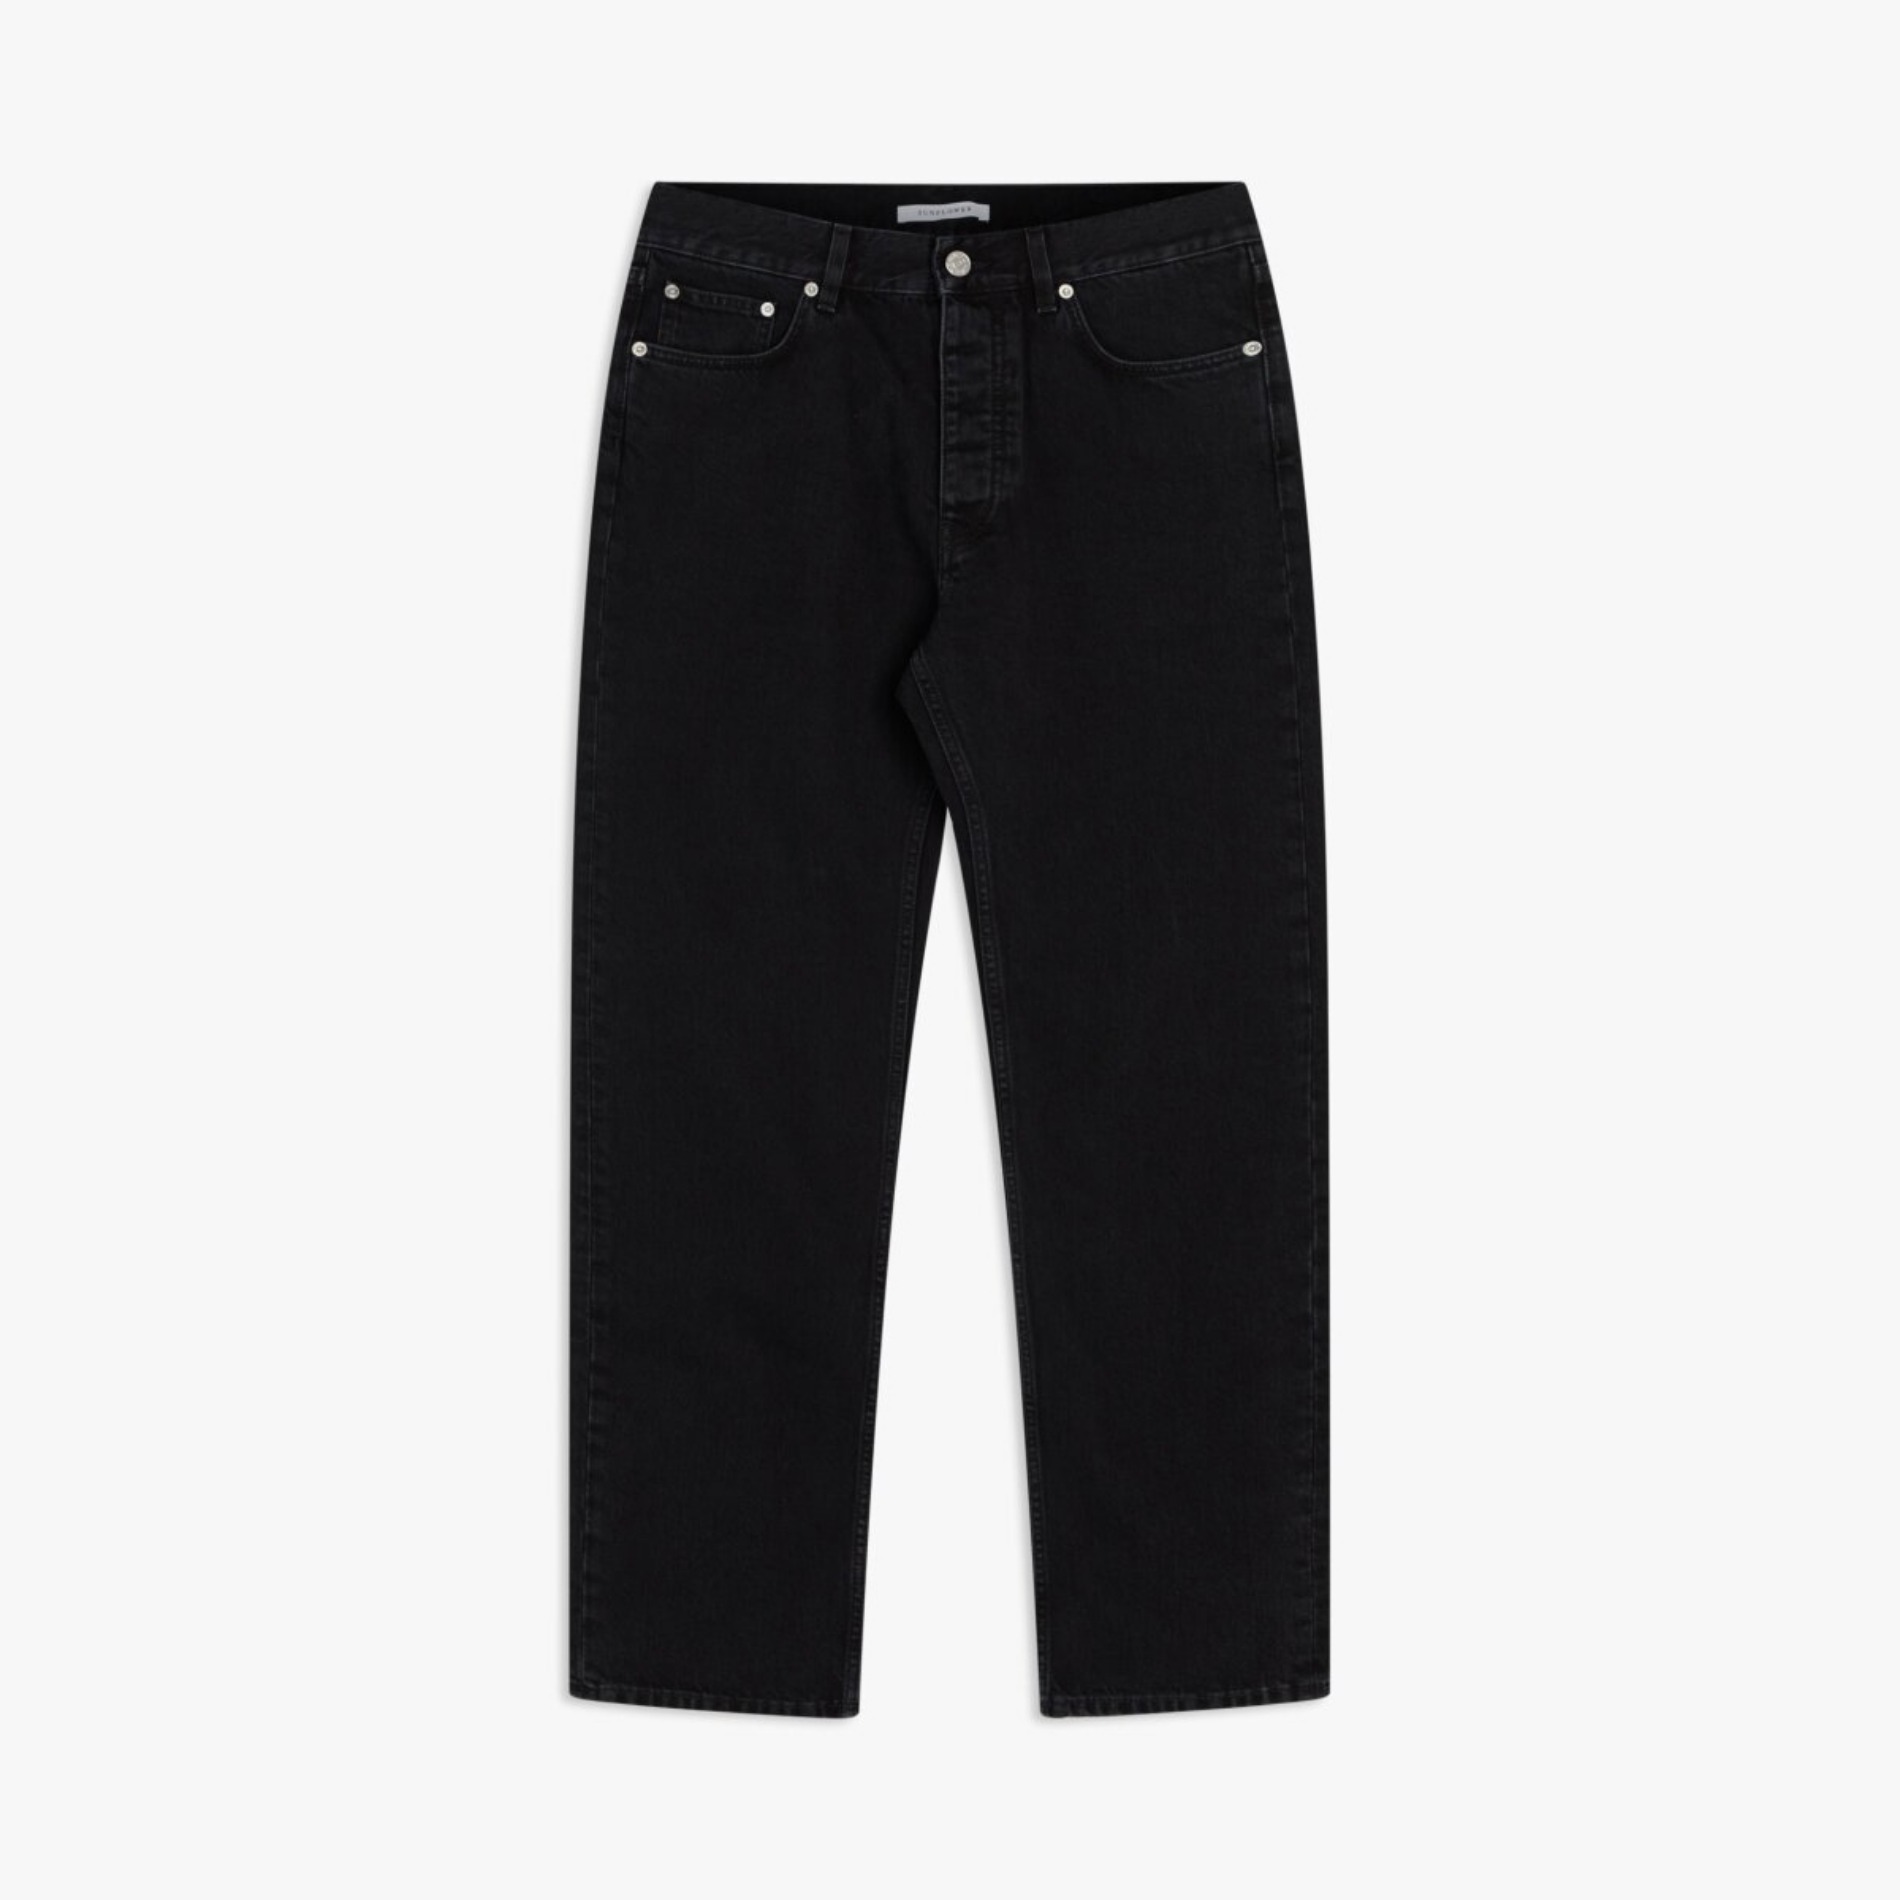 AW22 SUNFLOWER 5038 STANDARD JEANS WASHED BLACK